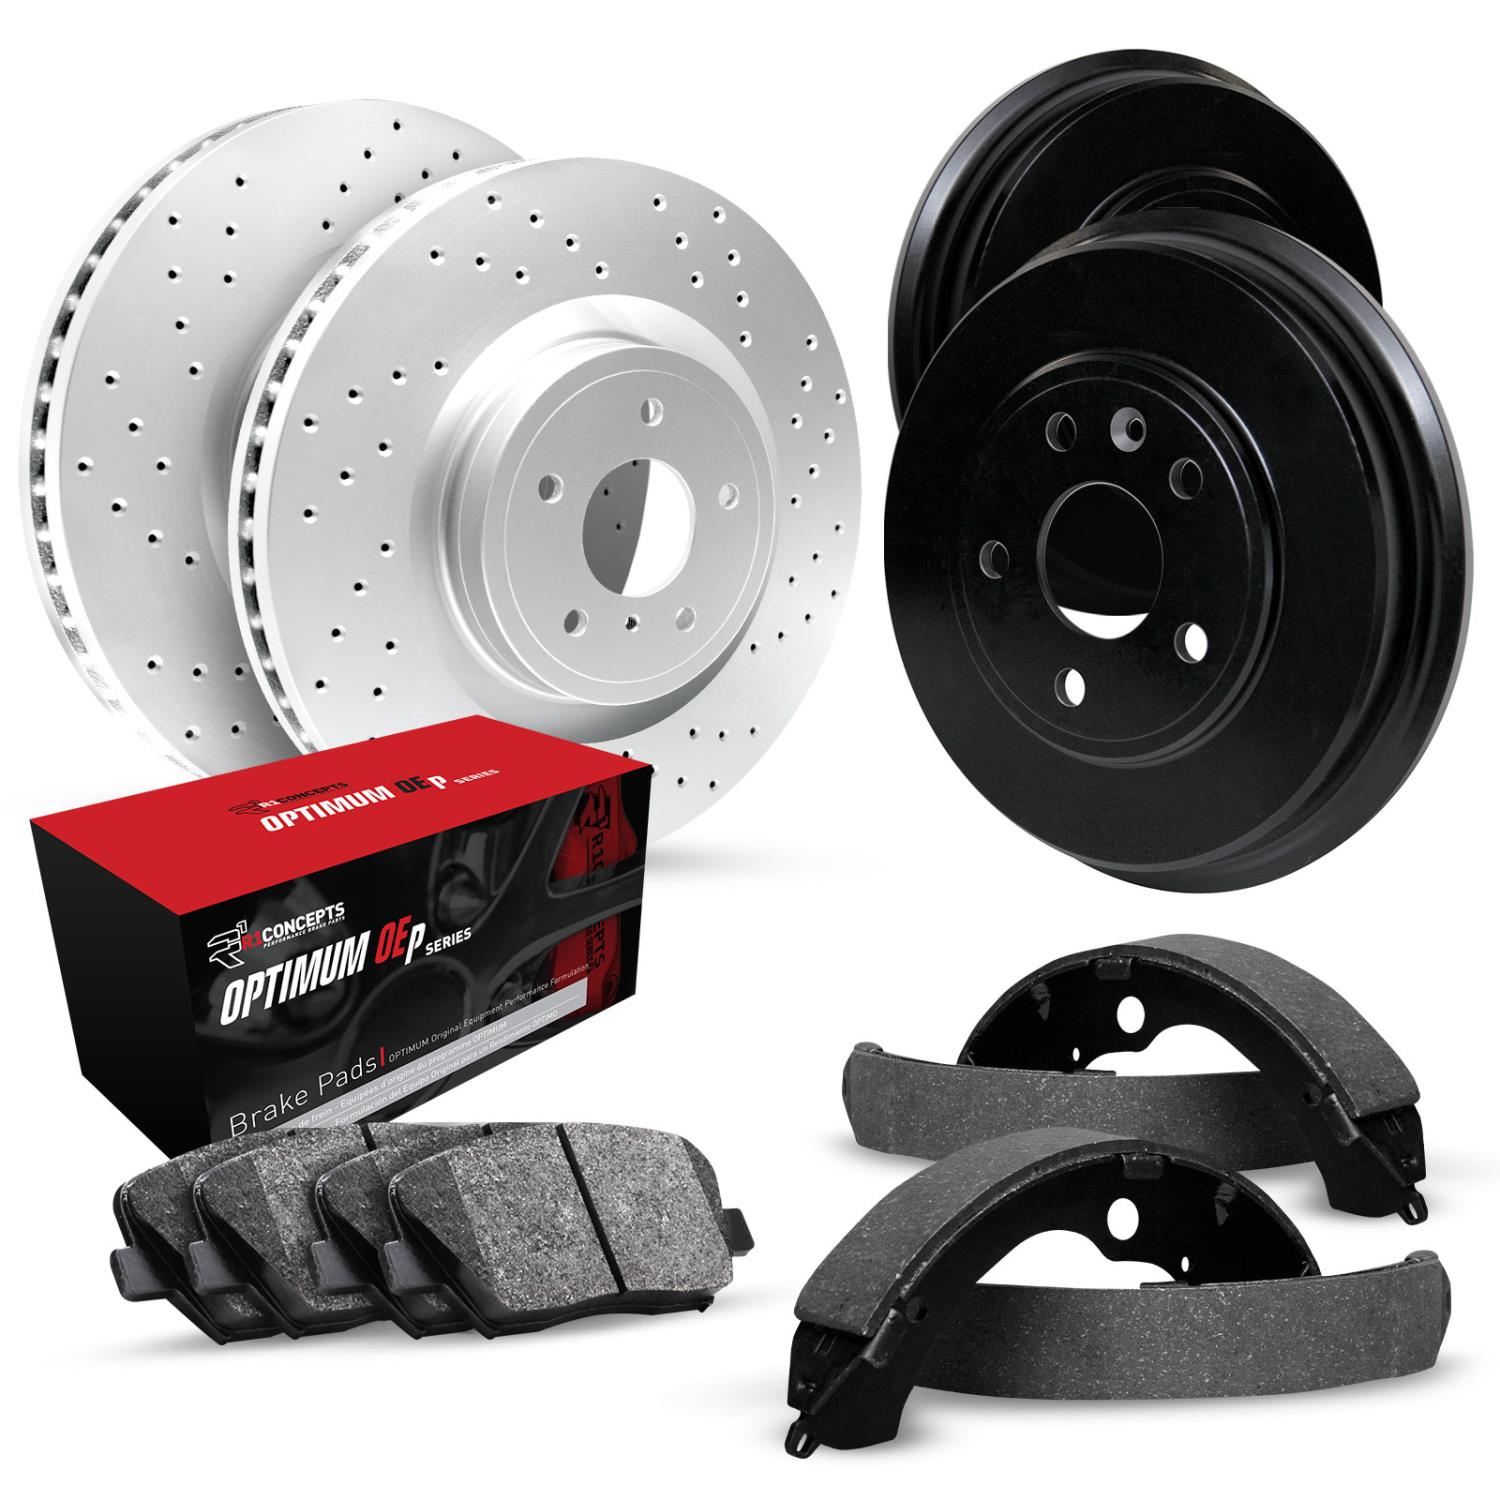 GEO-Carbon Drilled Brake Rotor & Drum Set w/Optimum OE Pads & Shoes, 2008-2015 GM, Position: Front & Rear